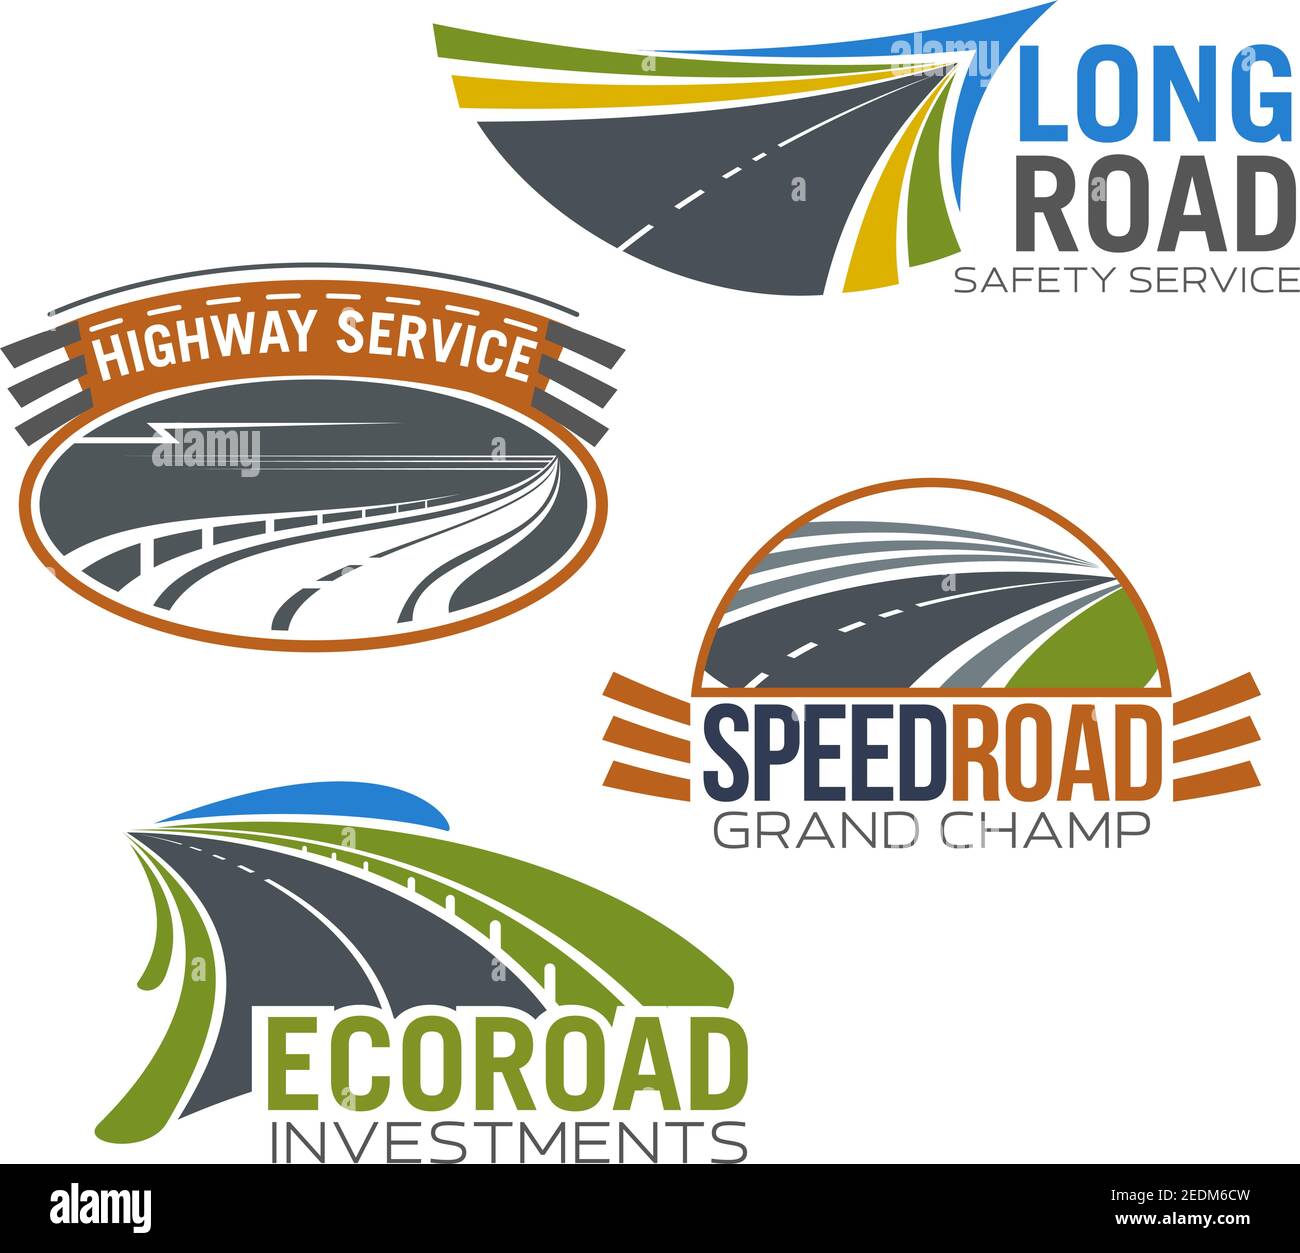 Roads and highways vector icons. Isolated emblems set for transportation route repair service, construction or investment company and speed car races Stock Vector